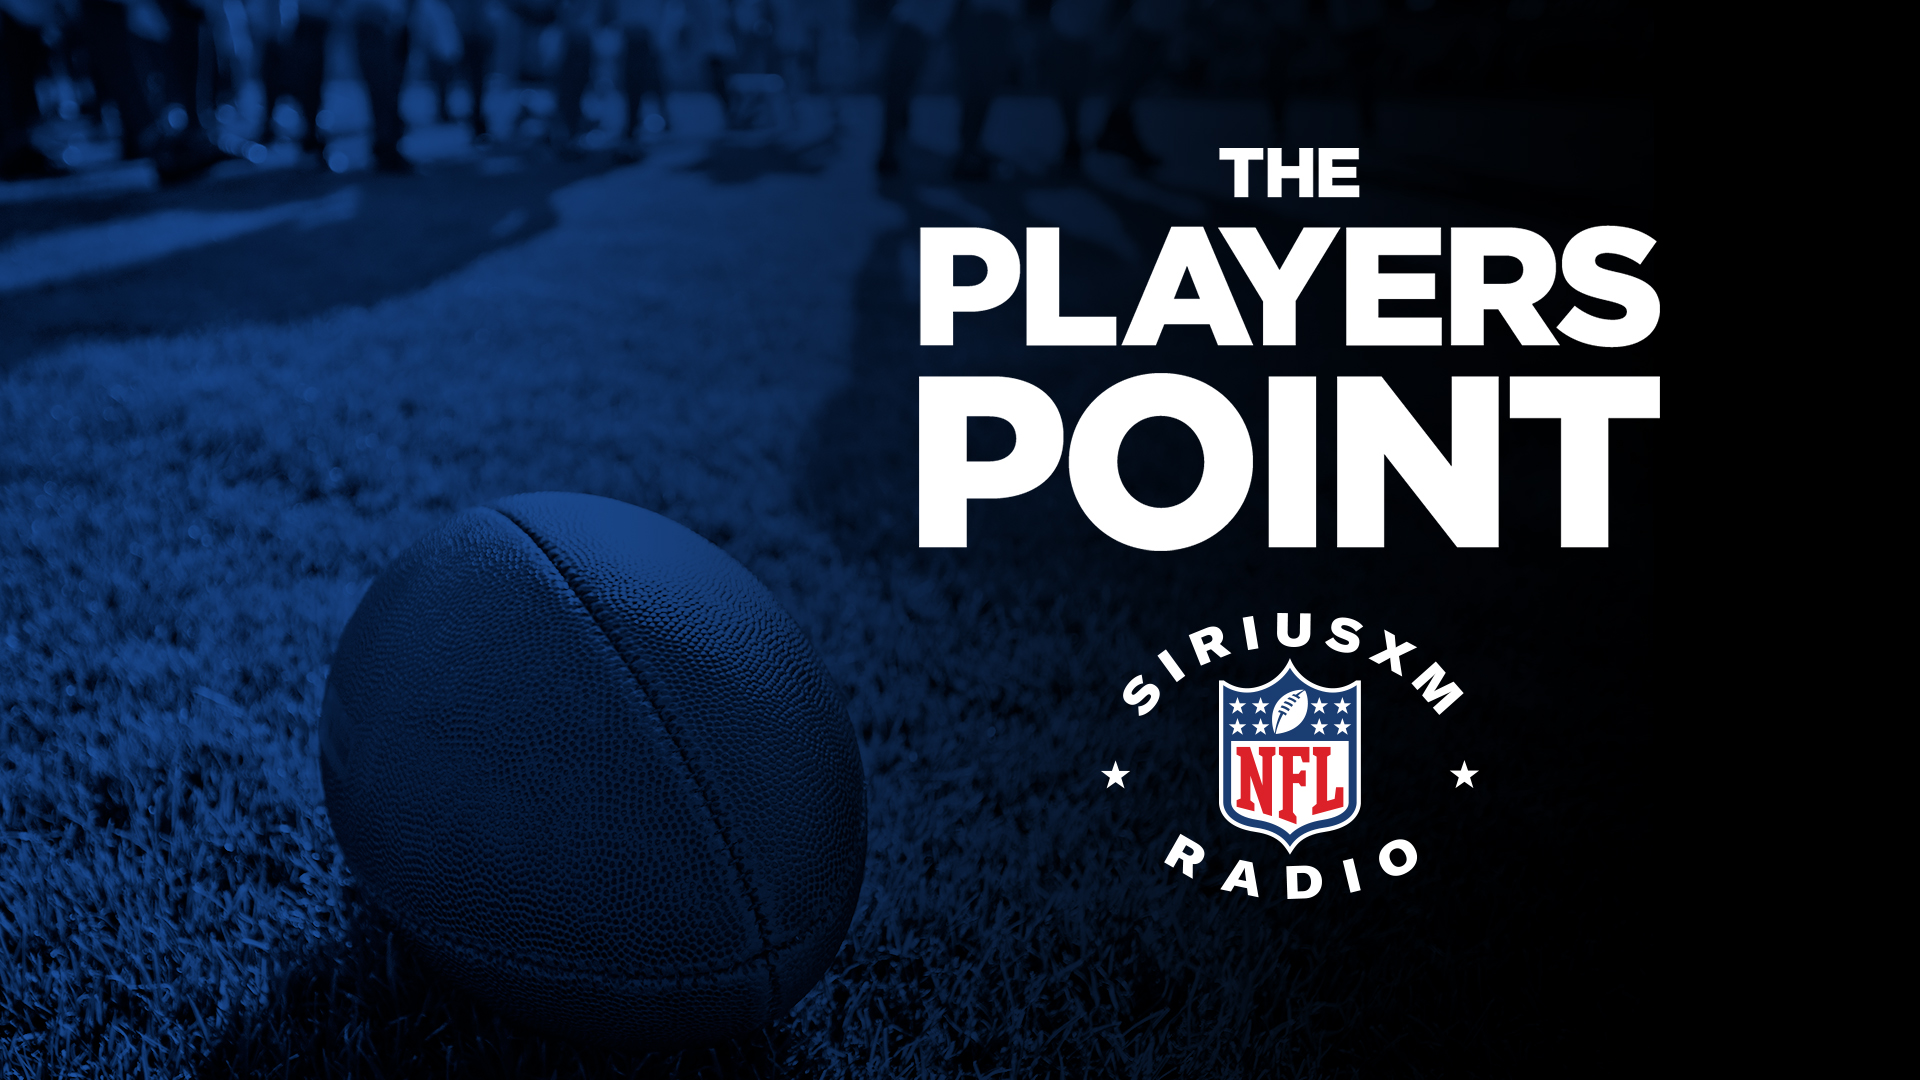 The Players Point show on SiriusXM NFL Radio